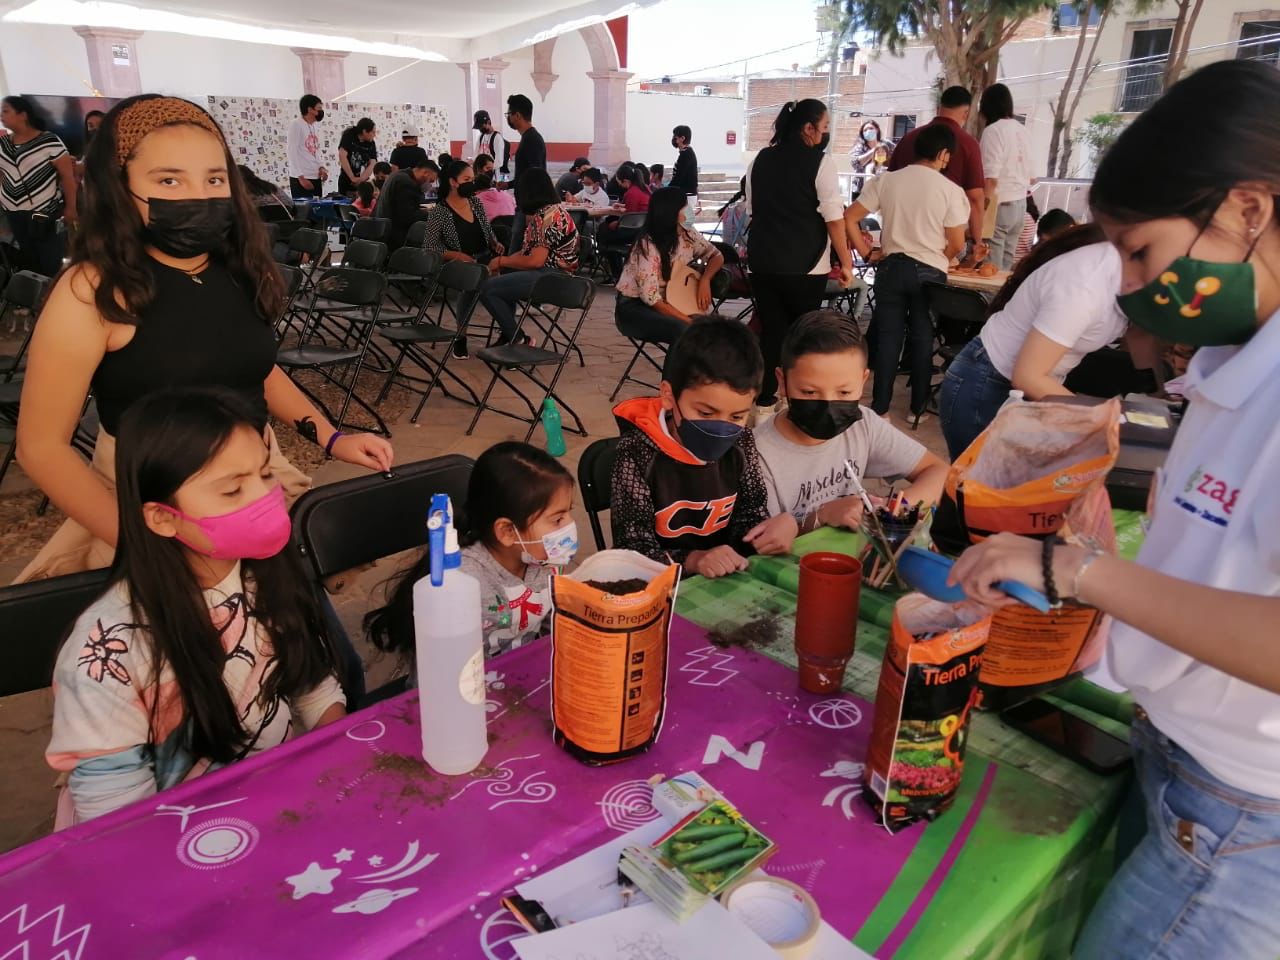 Hundreds of people attended Cozcyt science and technology workshops during Zacatecas Cultural Festival 2022